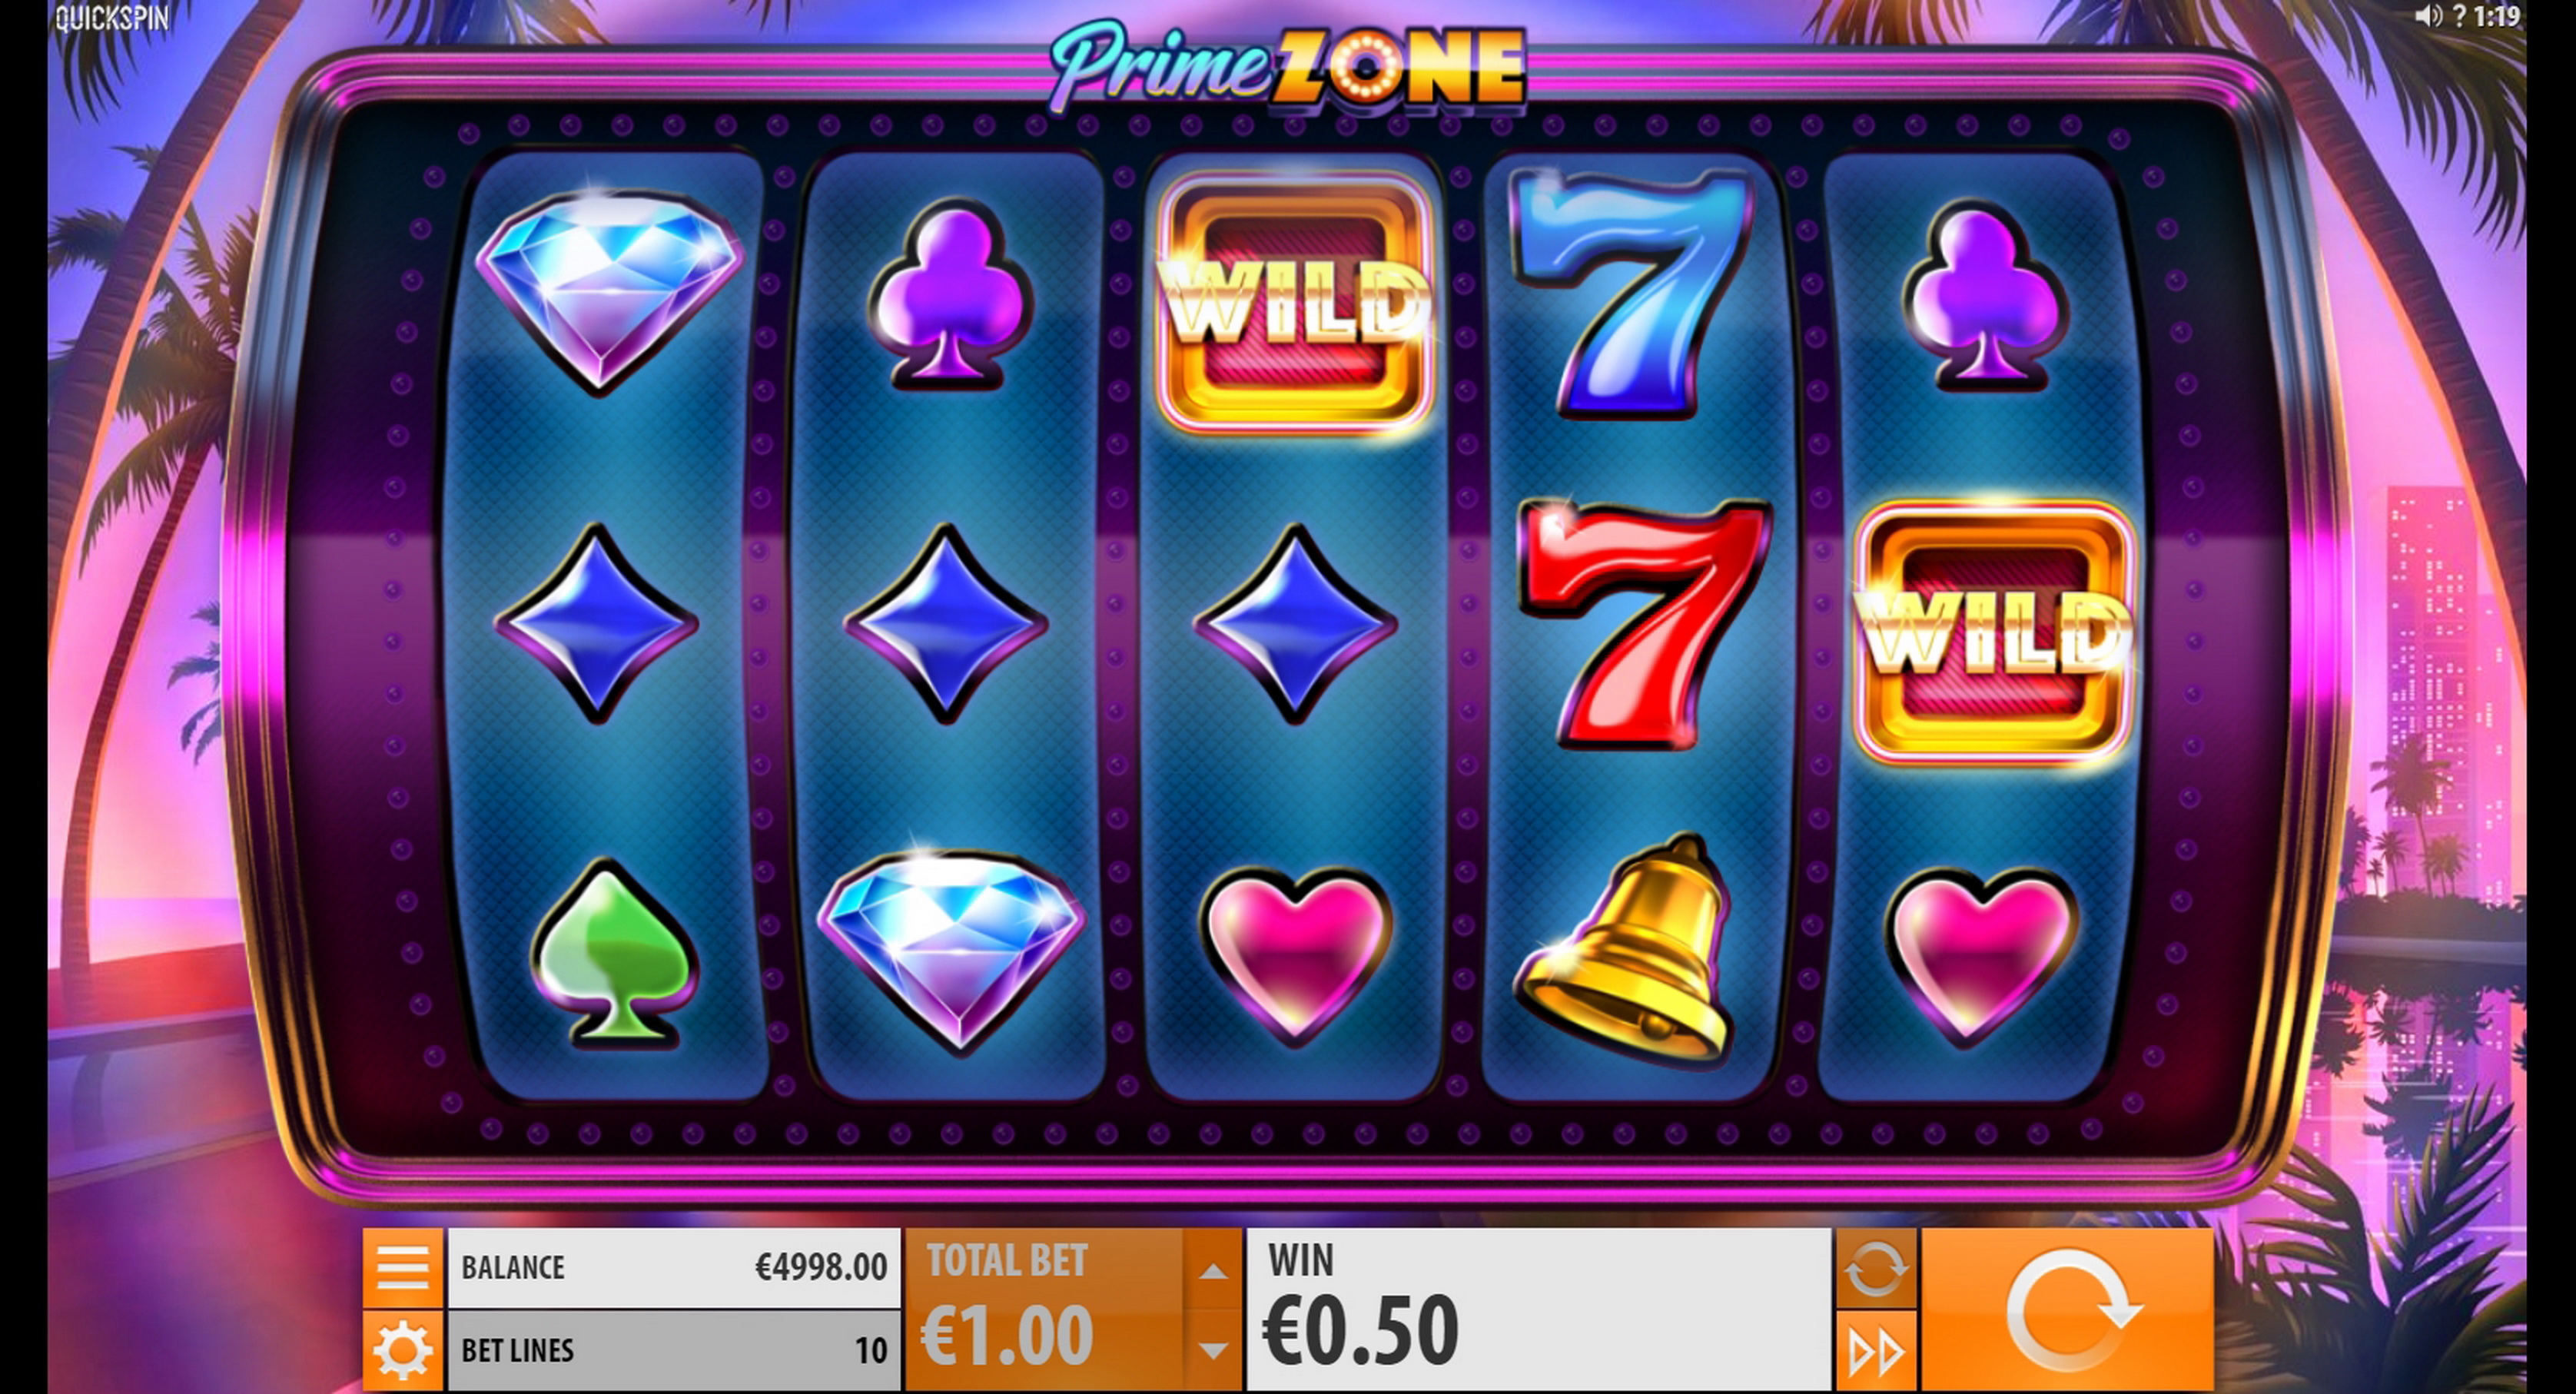 Win Money in Prime Zone Free Slot Game by Quickspin